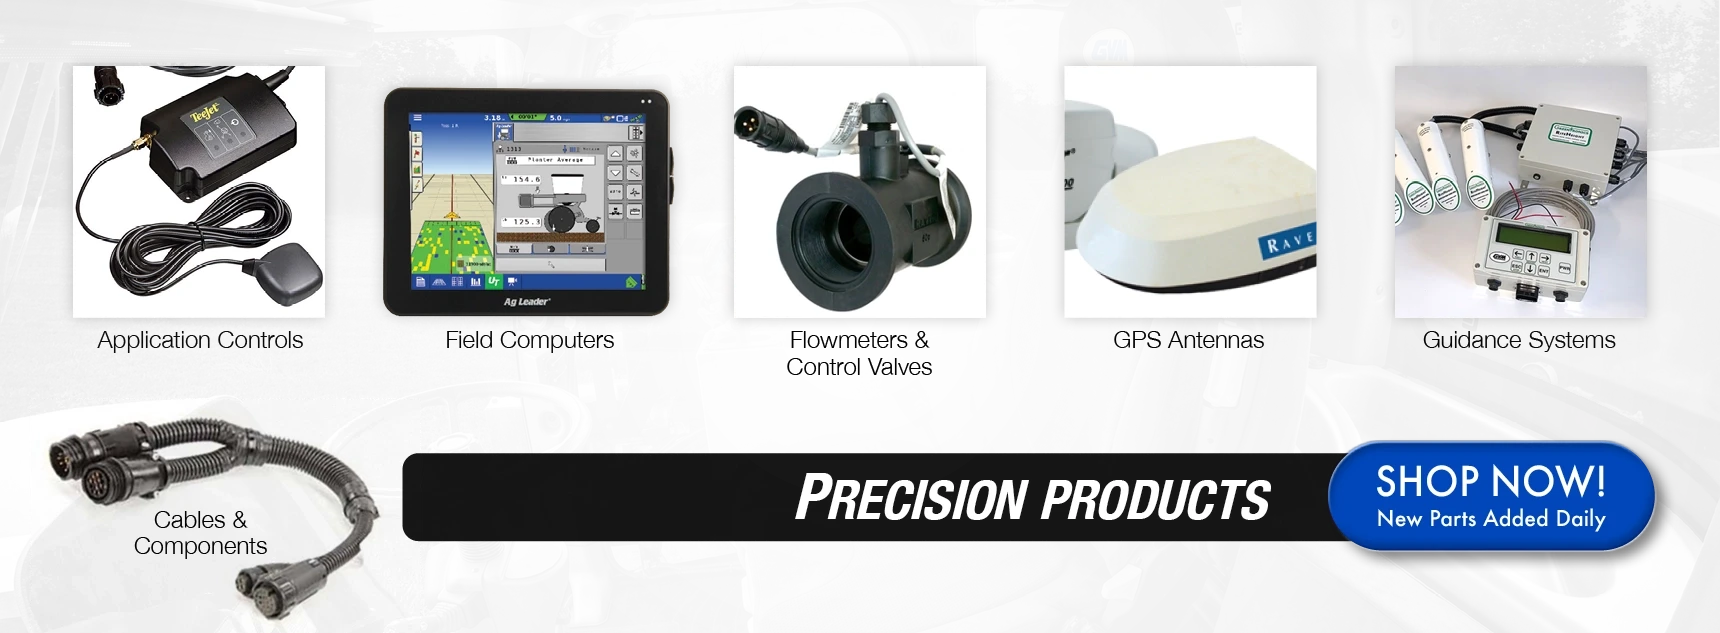 Precision Ag Products: Raven, Ag Leader, Greentronics, Application Controllers, GPS, Antennas, Guidance, Flow meters, Guidance, and Field Computers